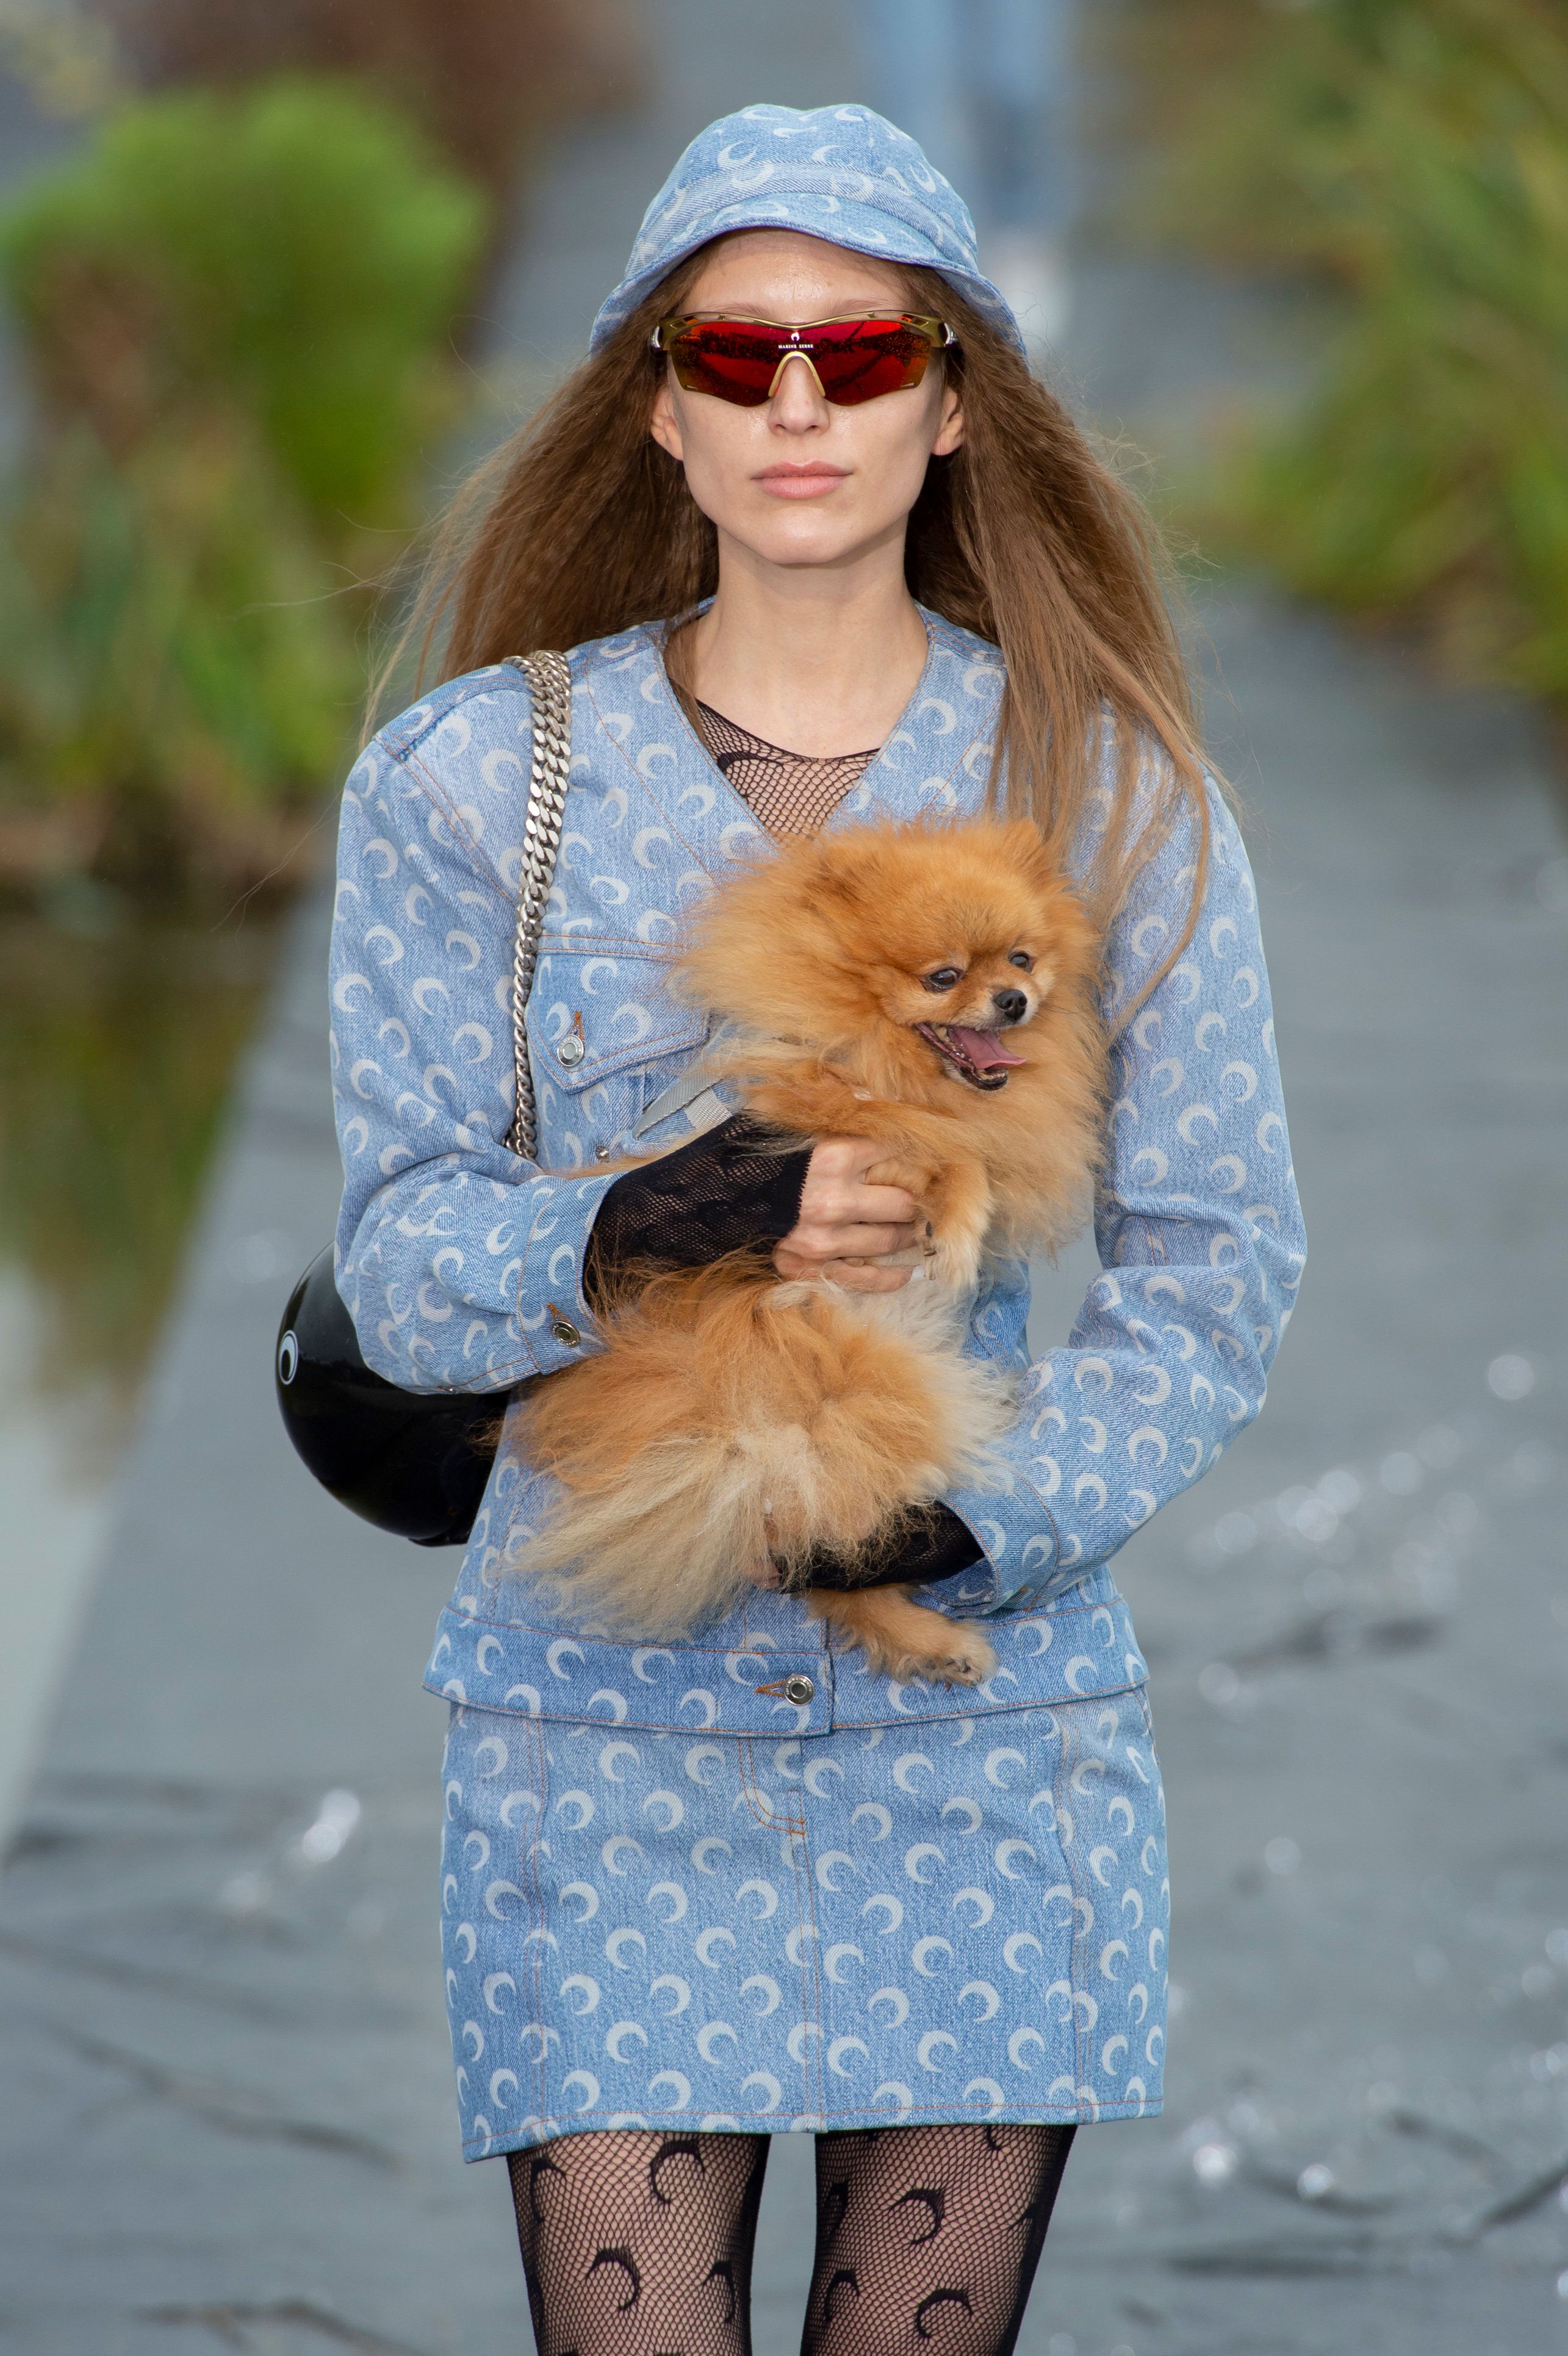 Marine Serre Included Dogs in Paris Fashion Week Show - PAPER Magazine